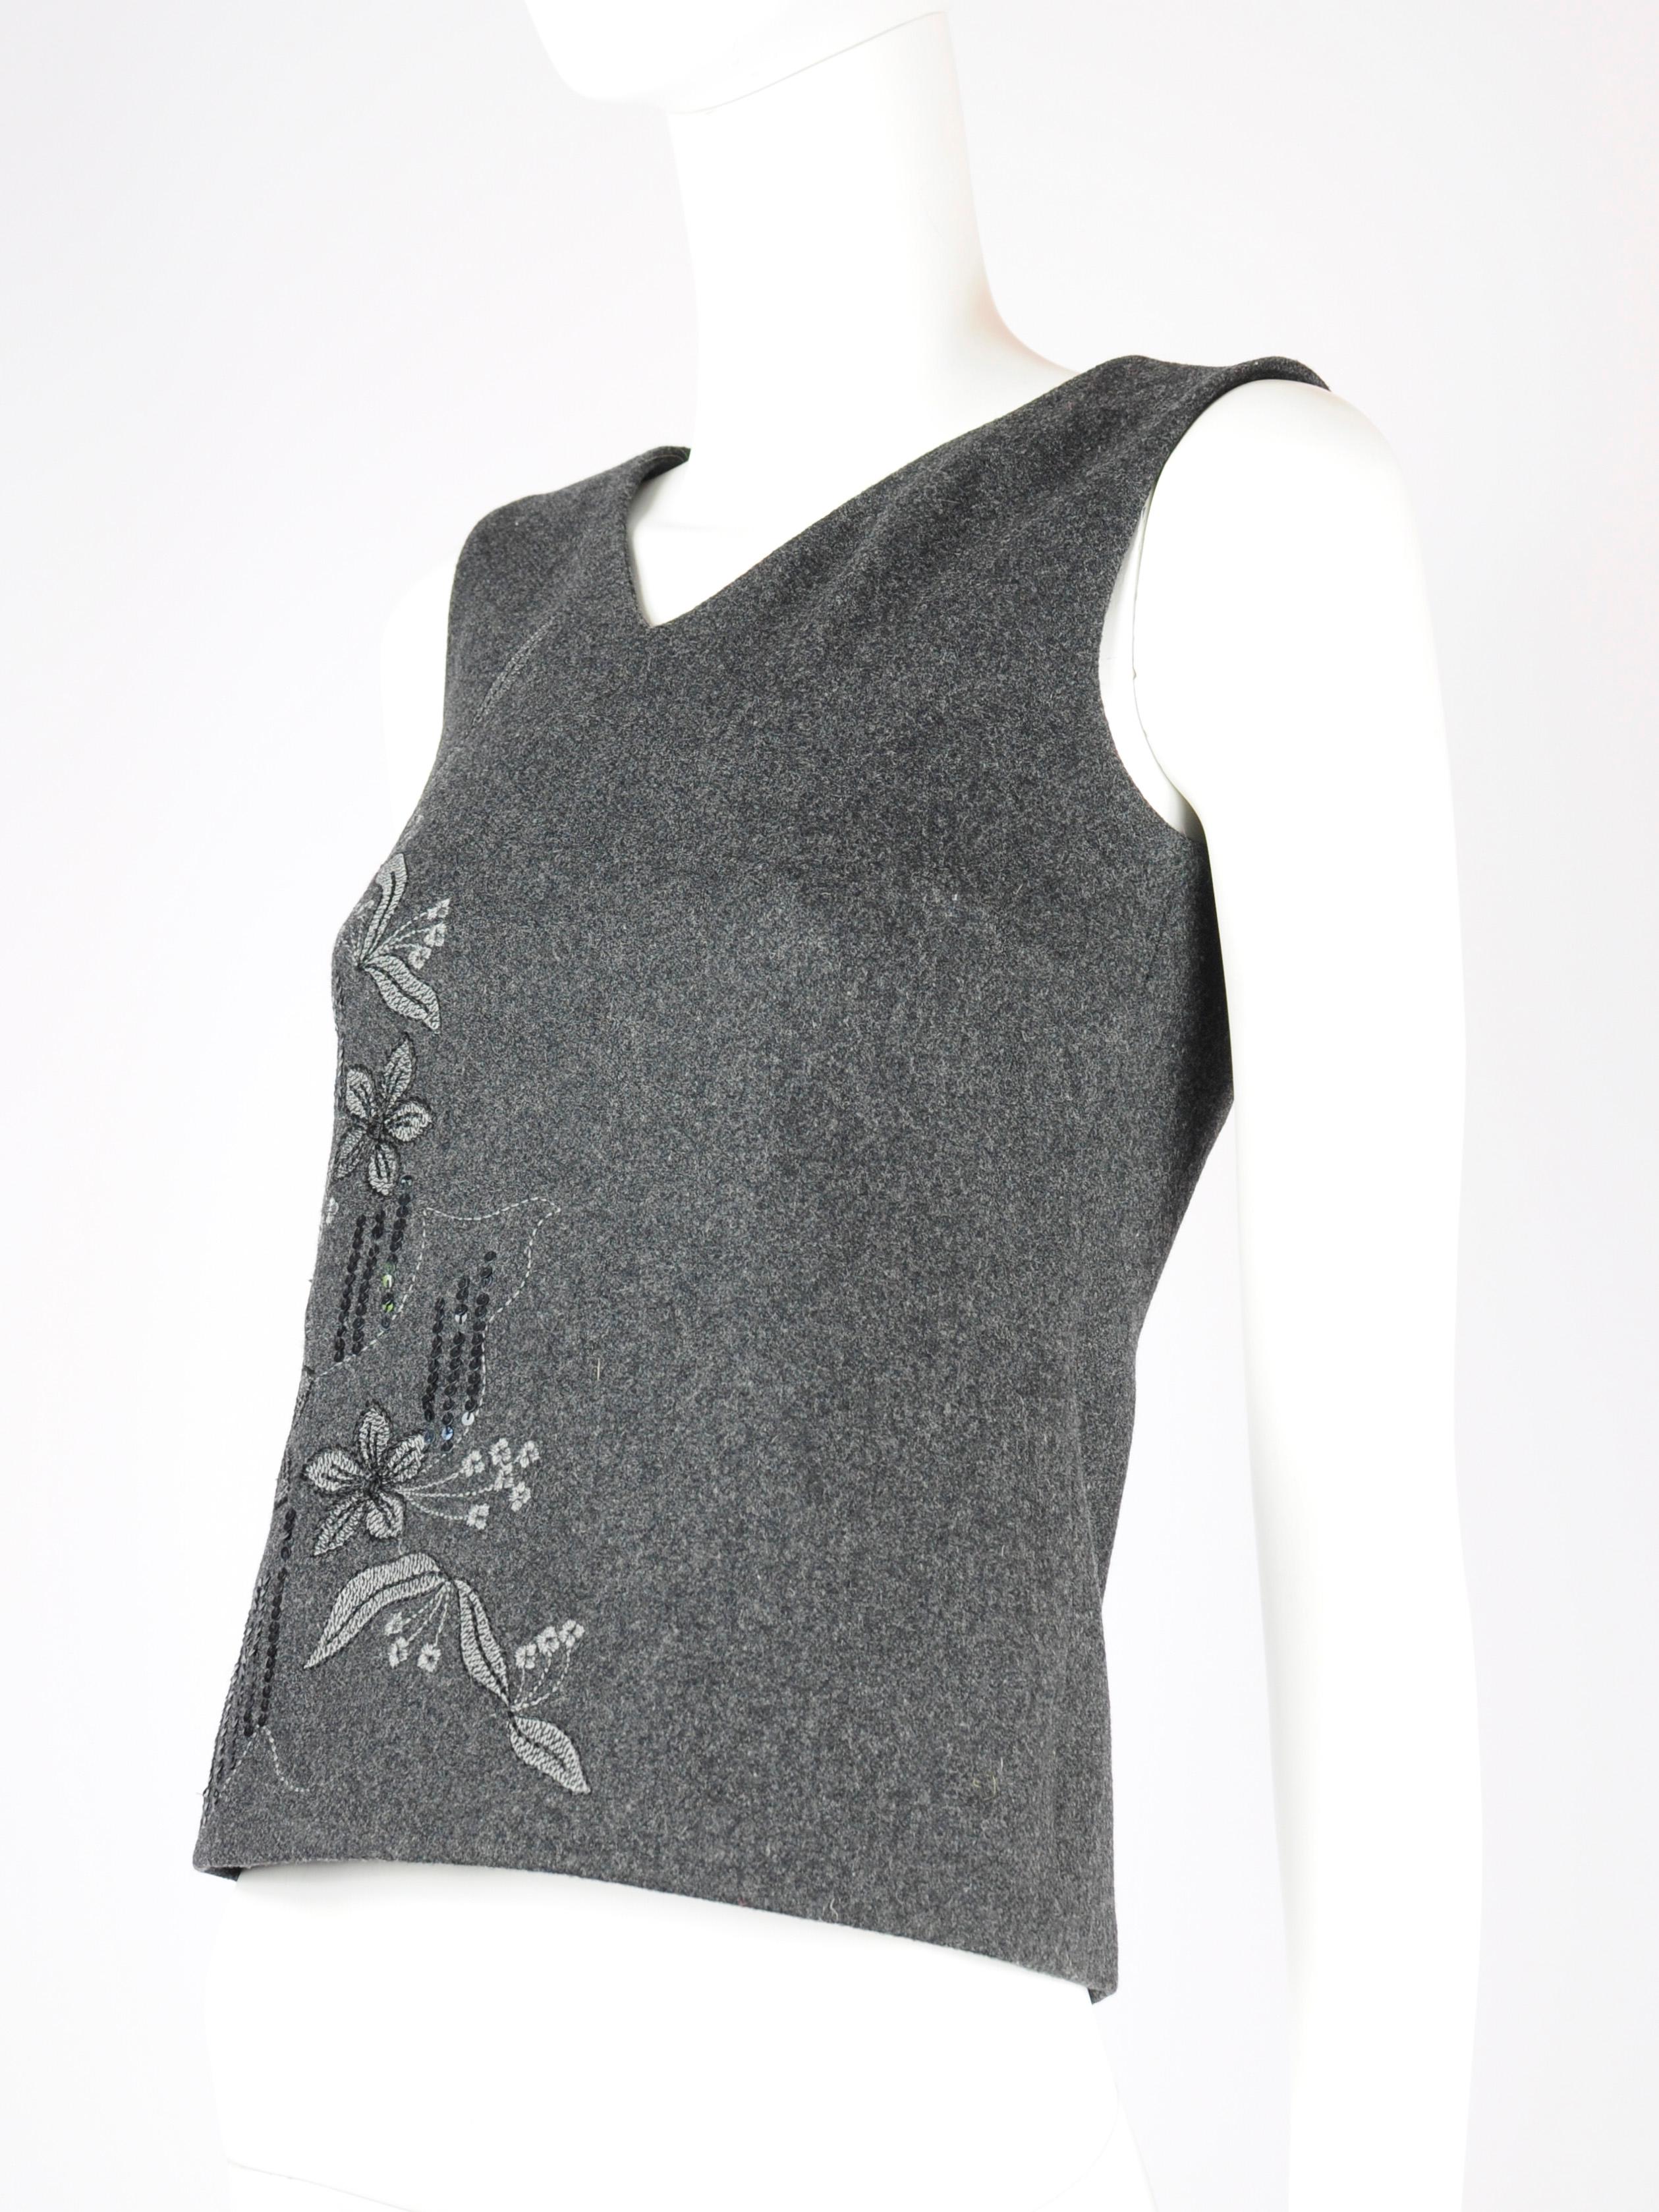 Dolce & Gabbana D&G vintage sleeveless top, new with tags/ deadstock. This dark grey embroidered top by D&G features a V-neck and a zipper that goes all the way down the back. There’s a floral embroidery on the front with some sequin details as